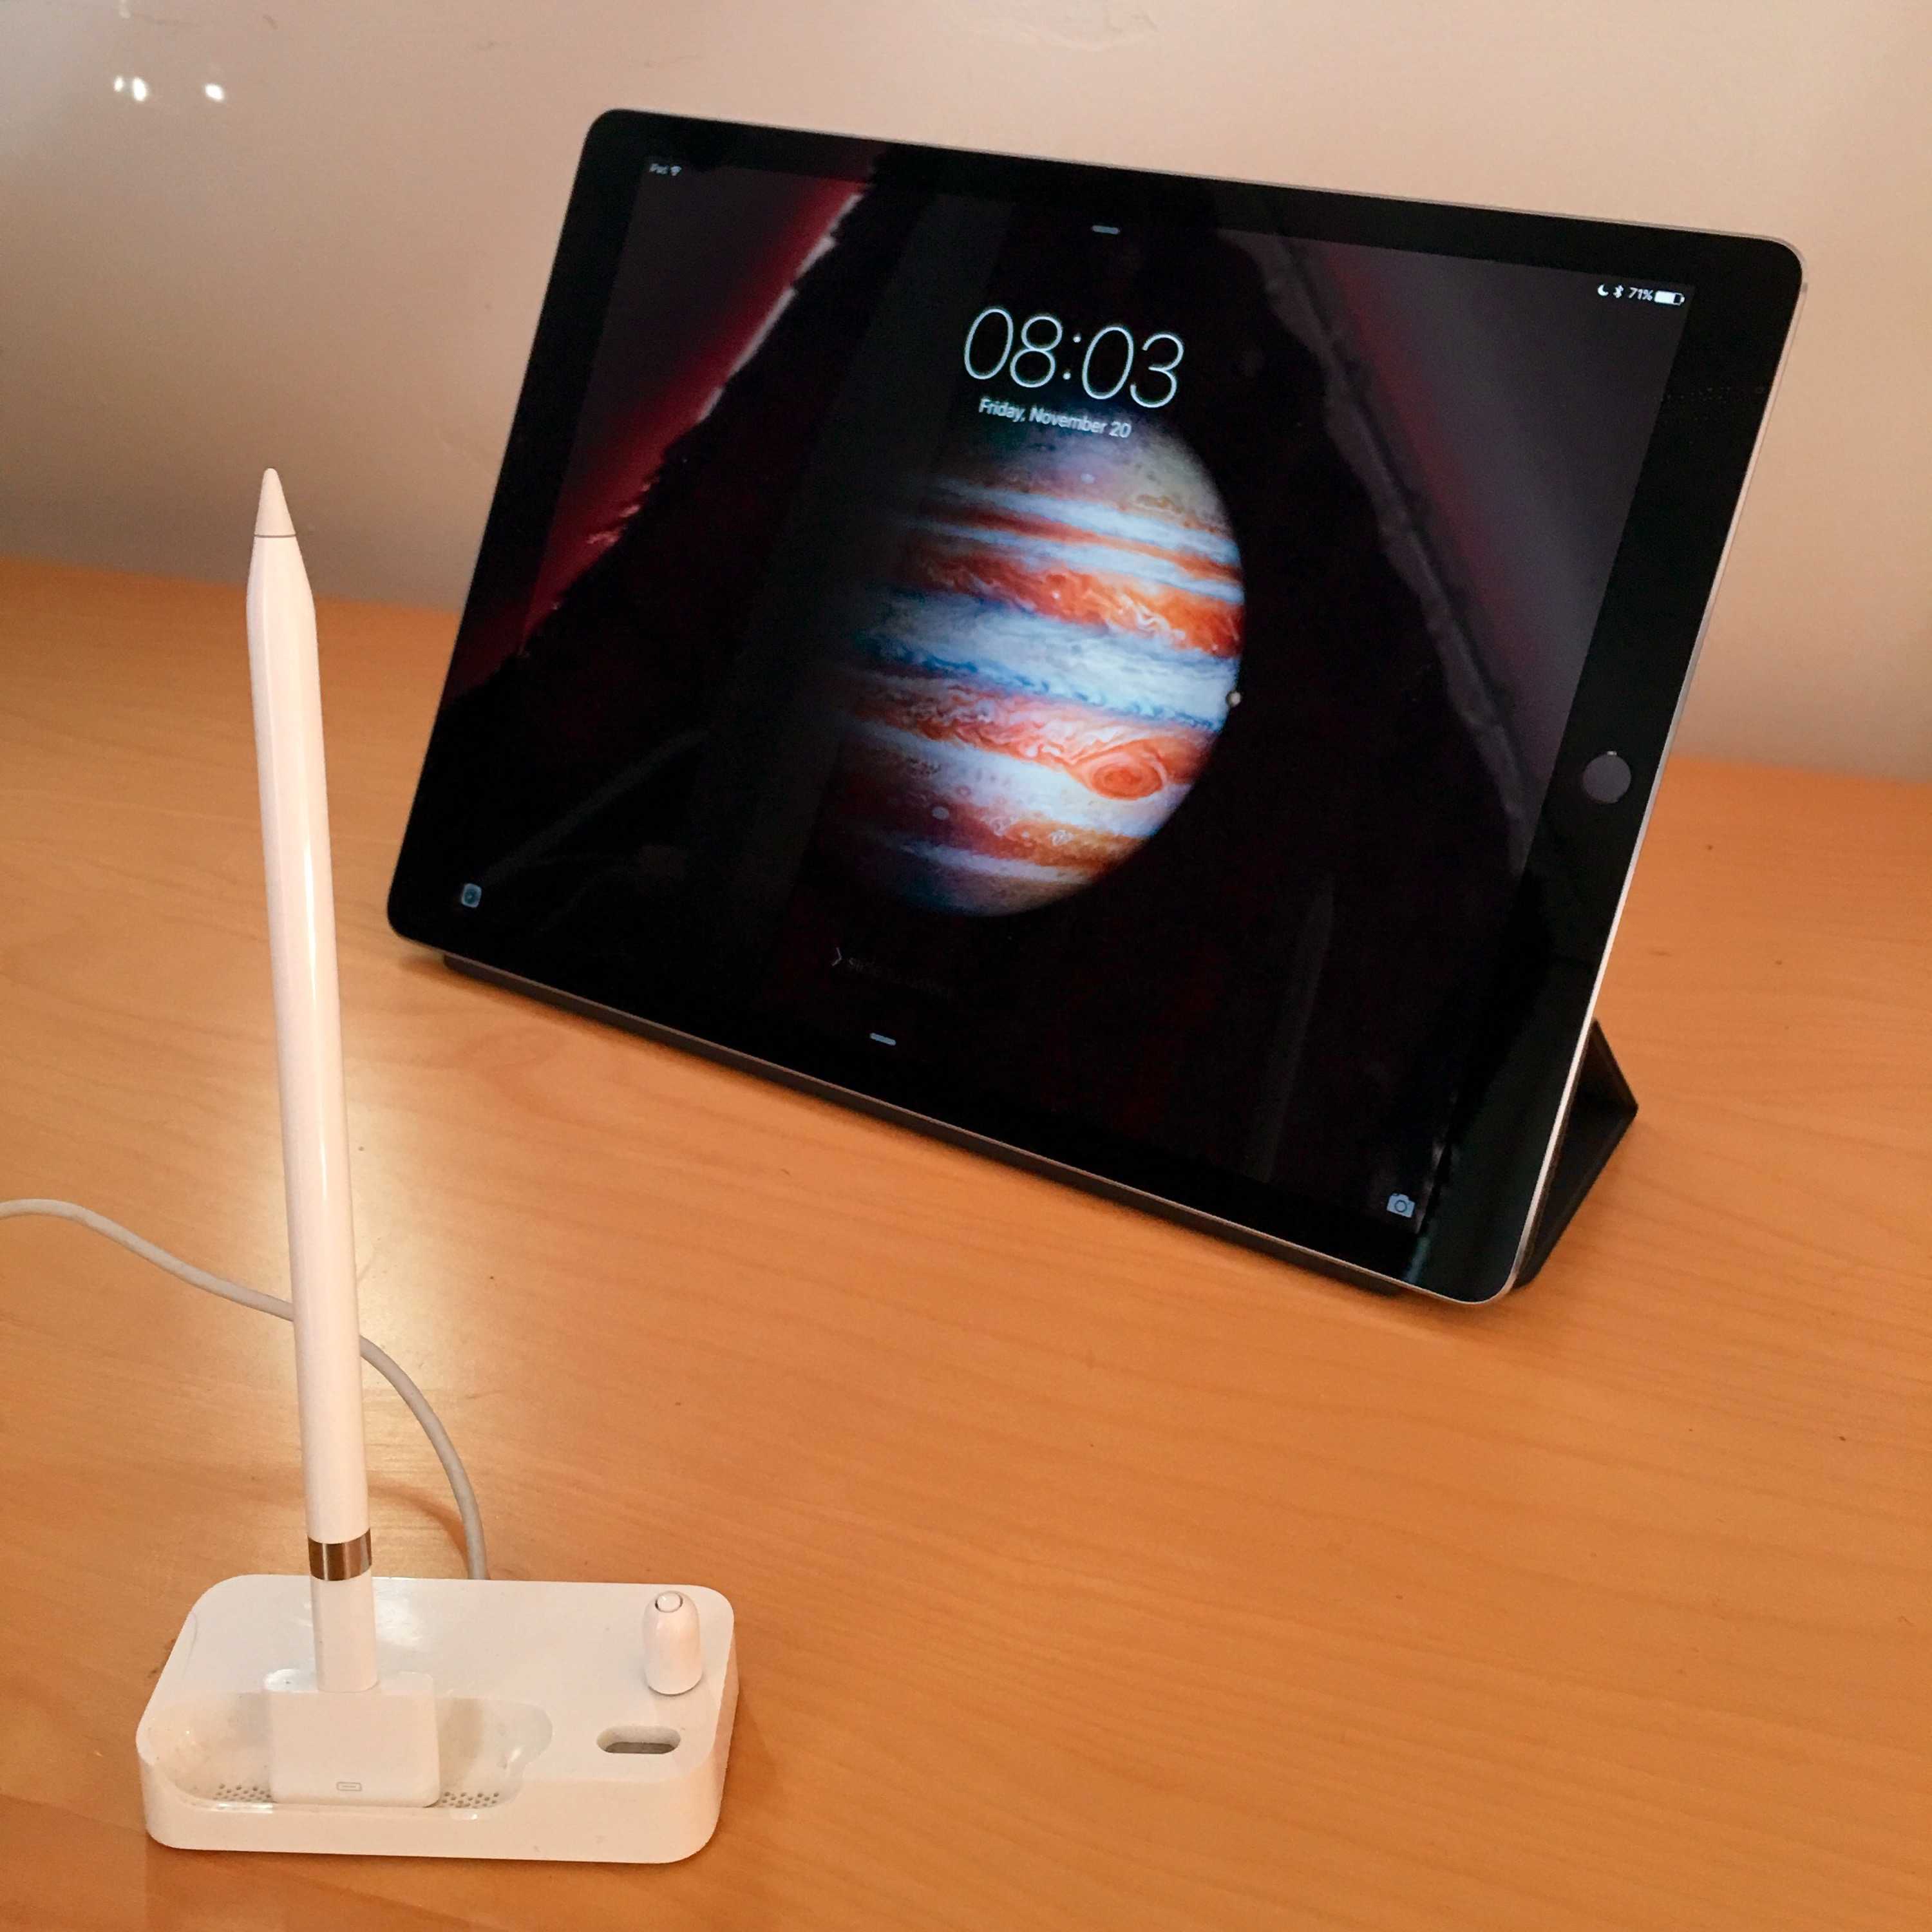 Using an old iPhone Bluetooth Headset dock as an Apple Pencil dock. 